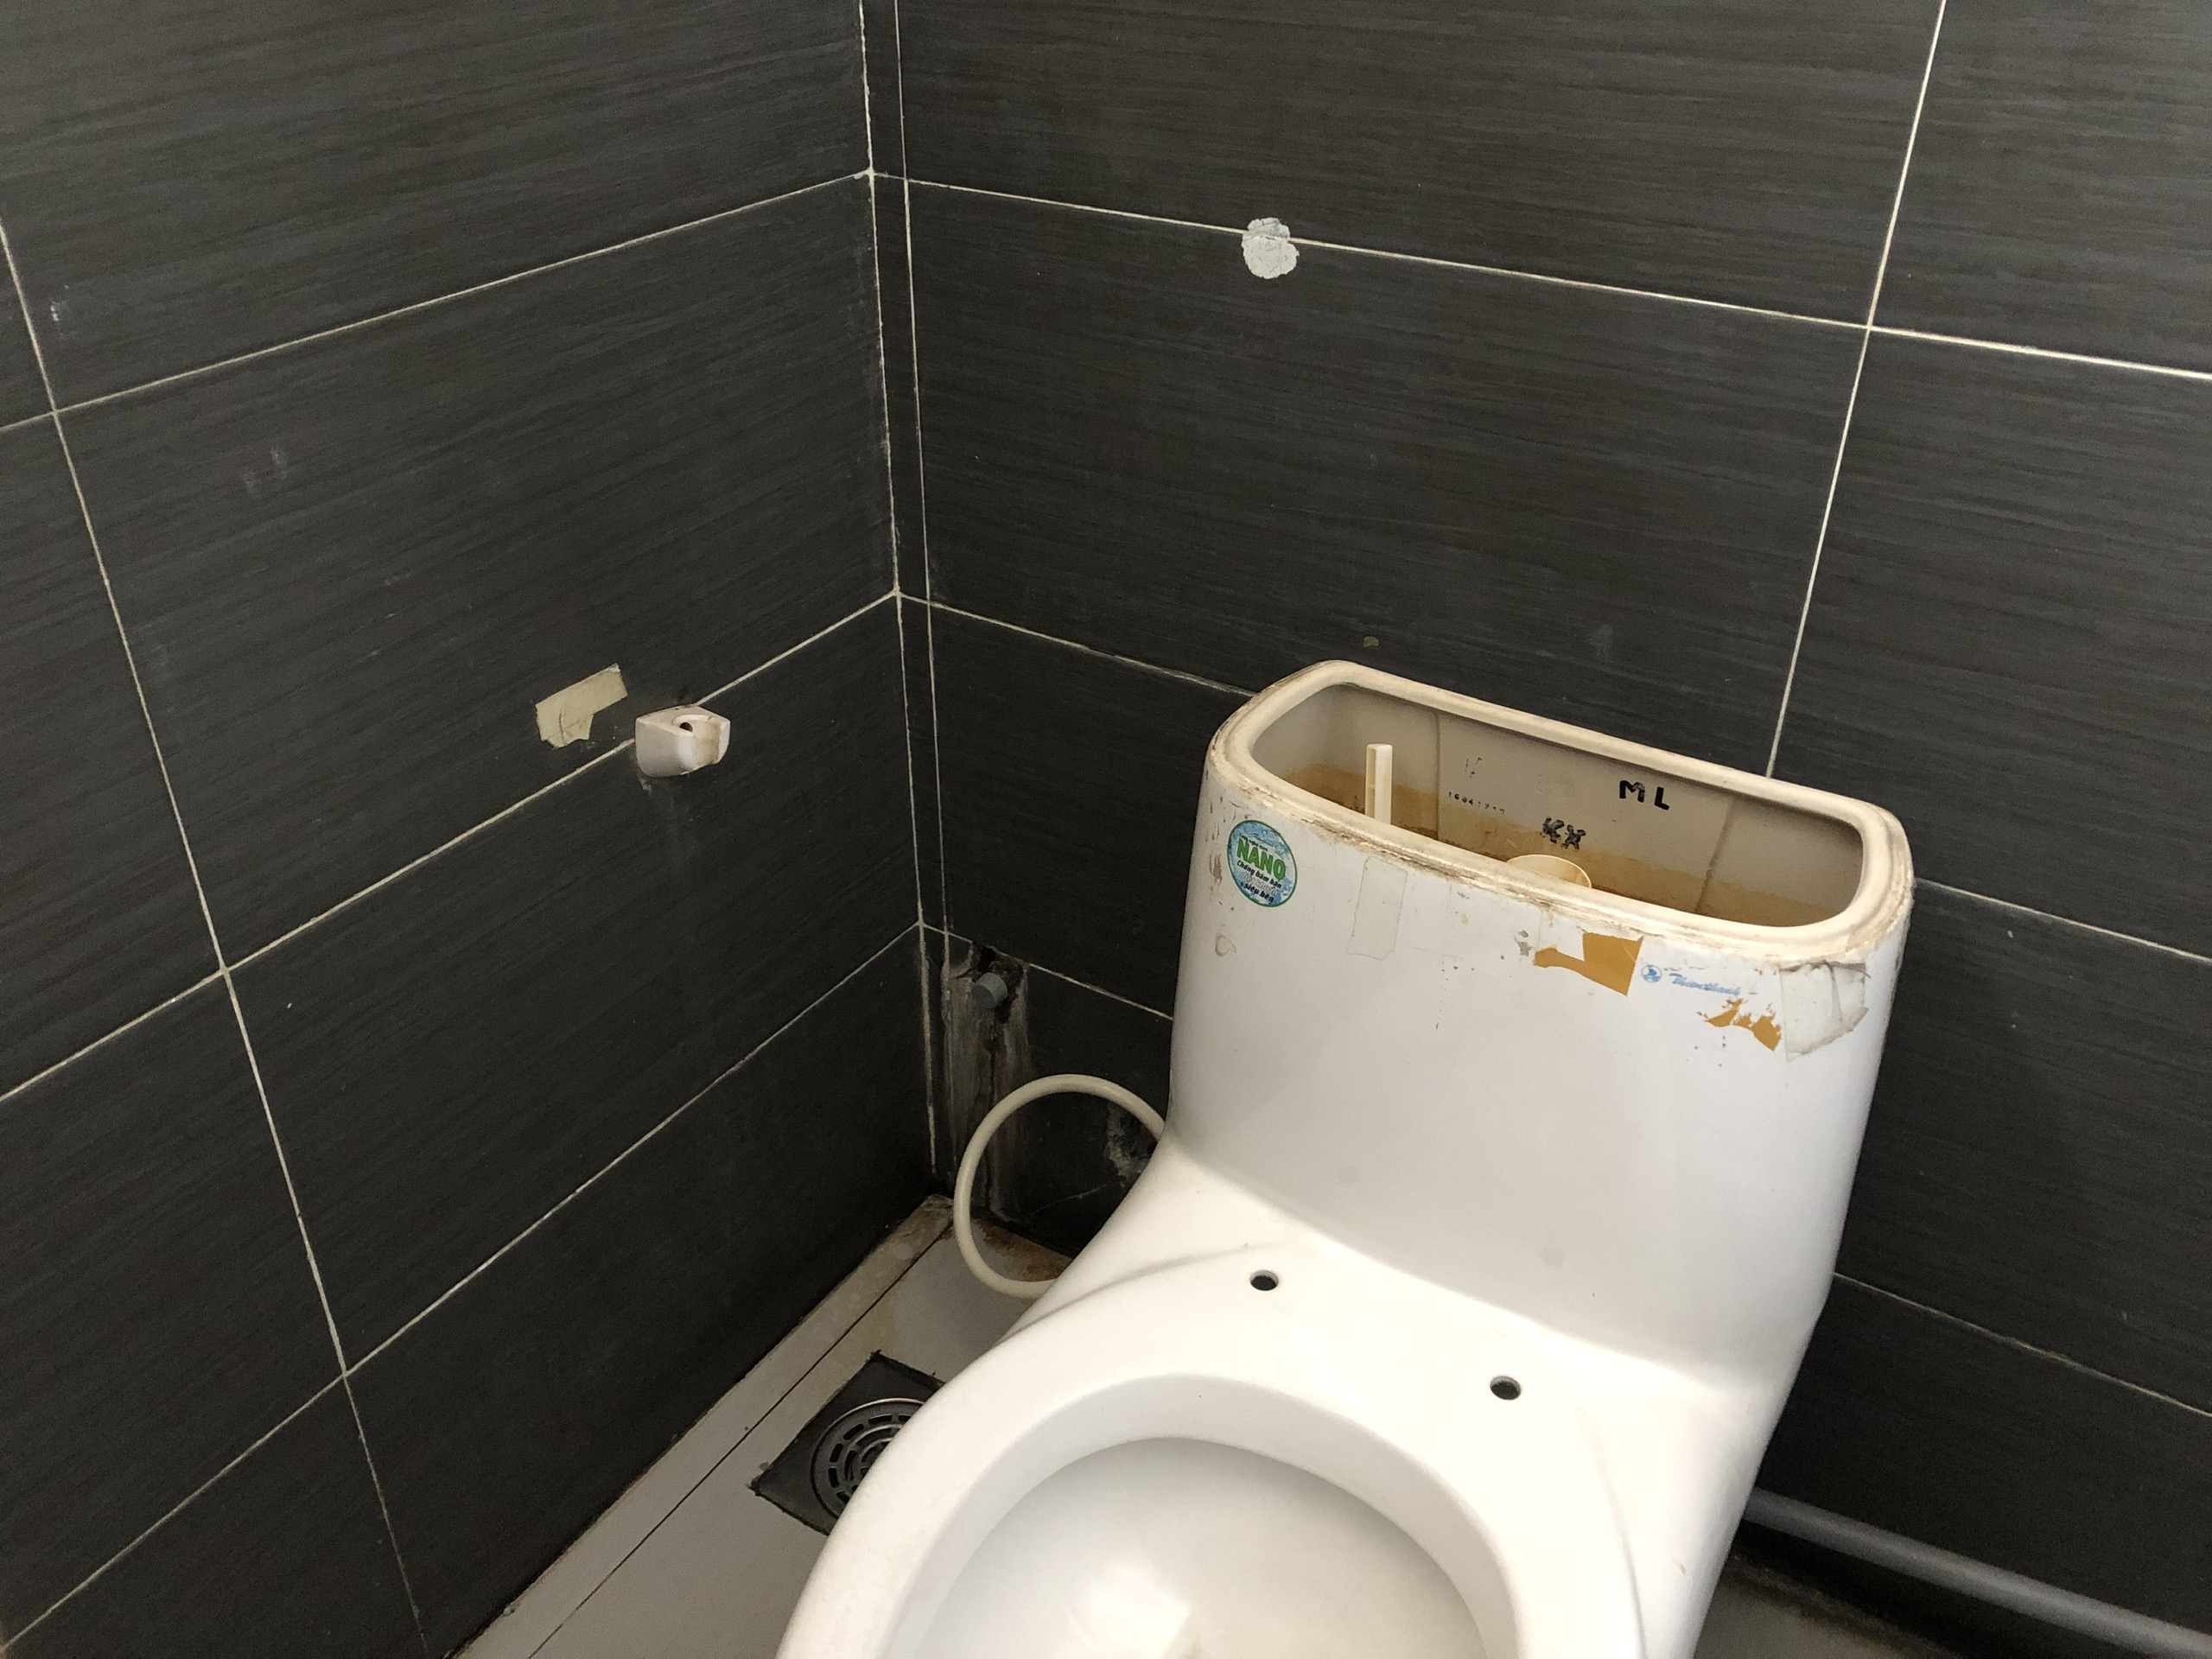 A toilet lacks a bidet sprayer and toilet paper while its tank broke down at the Saigon Railway Station in Ho Chi Minh City. Photo: Luu Duyen / Tuoi Tre